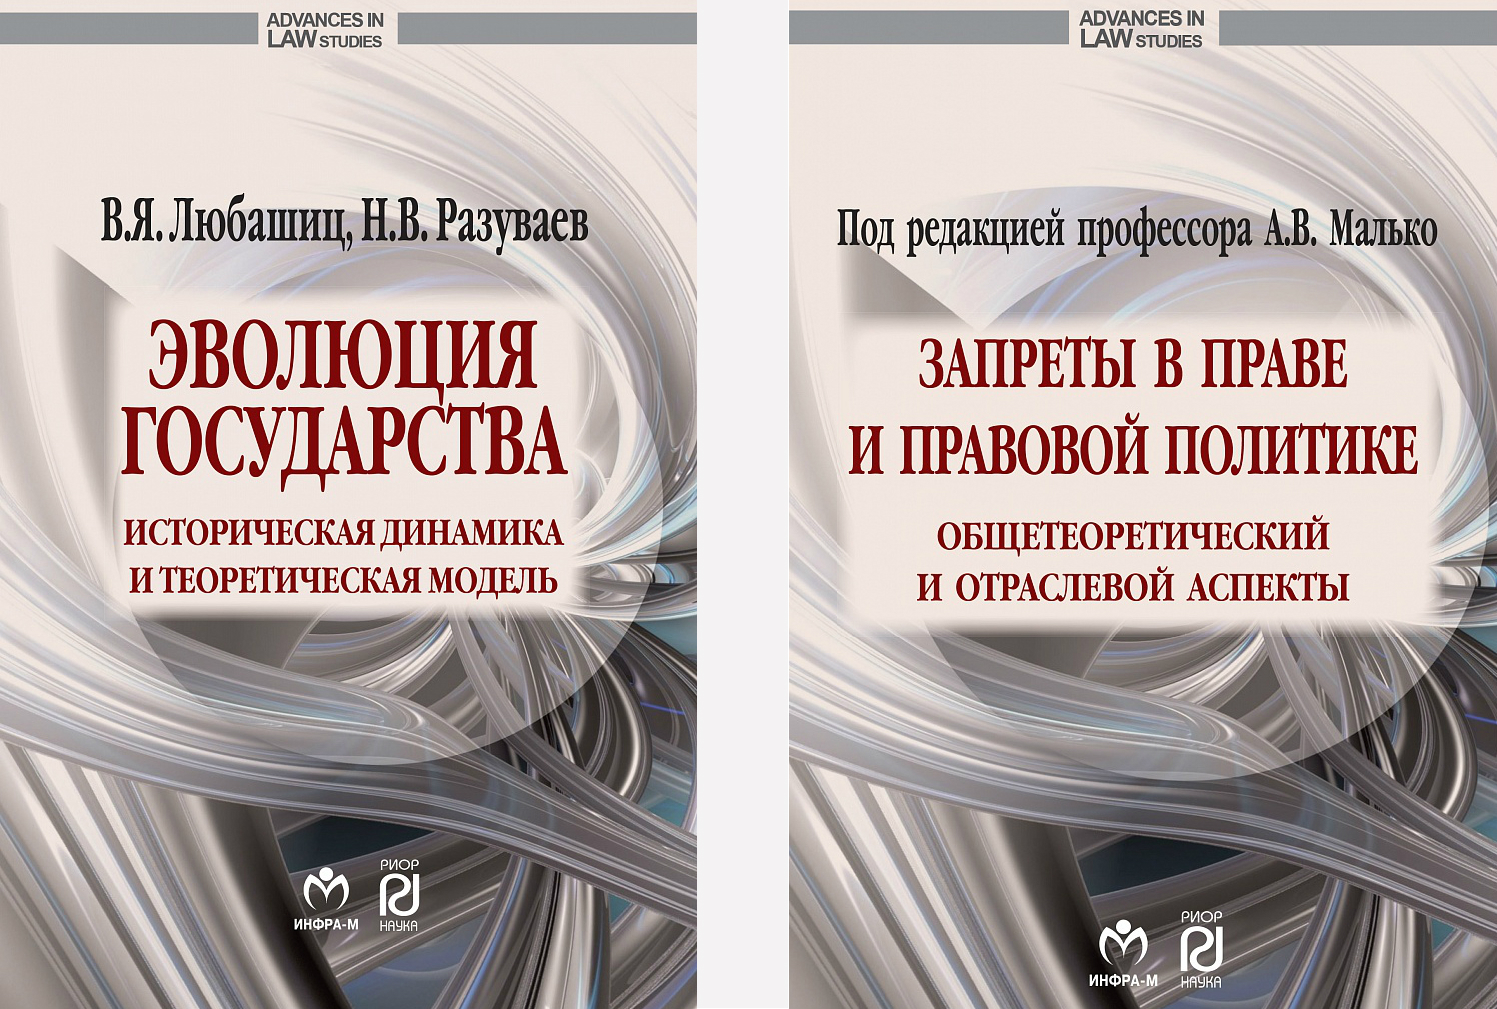                         The second book of a new series of publications of scientific achievements in the field of law
            